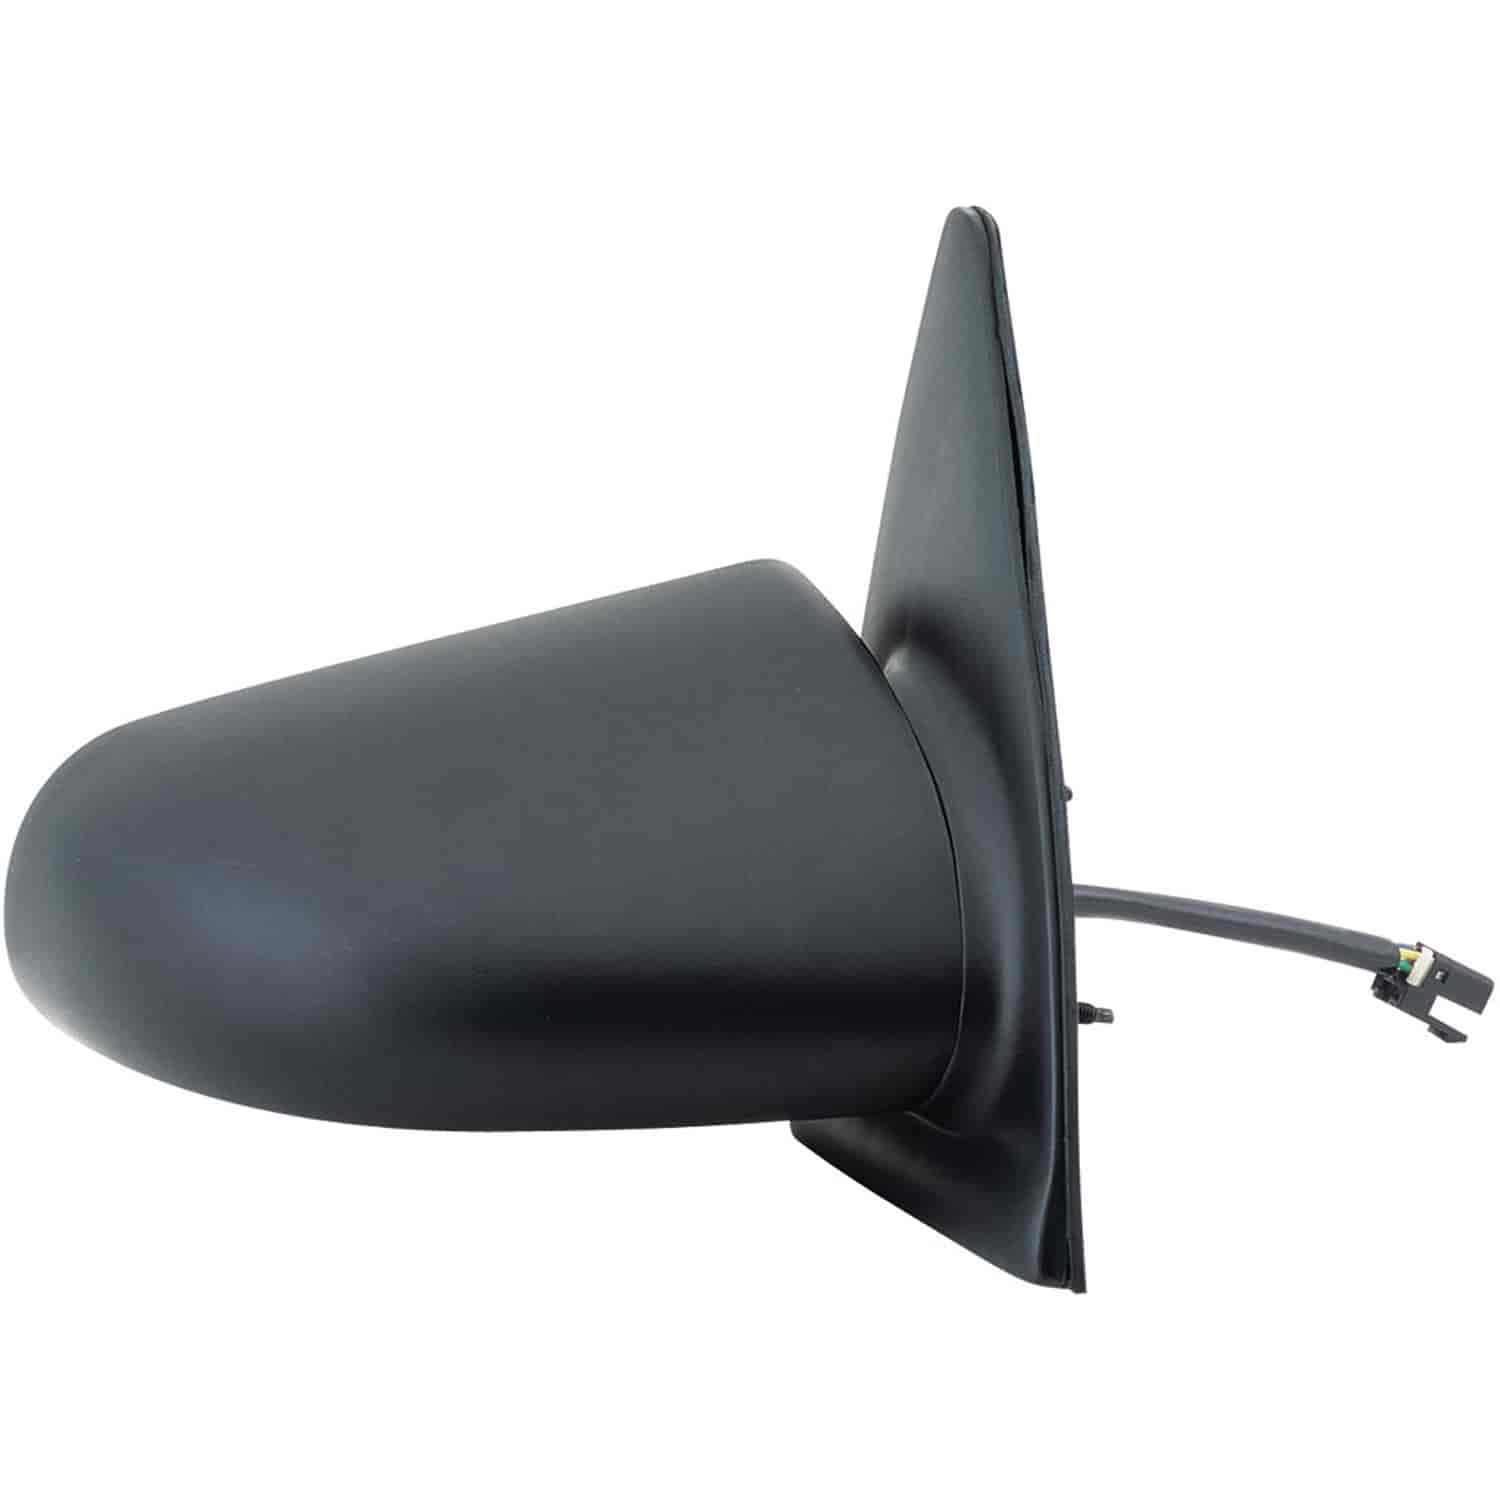 OEM Style Replacement mirror for 91-95 Saturn Sedan/Wagon ONLY passenger side mirror tested to fit a